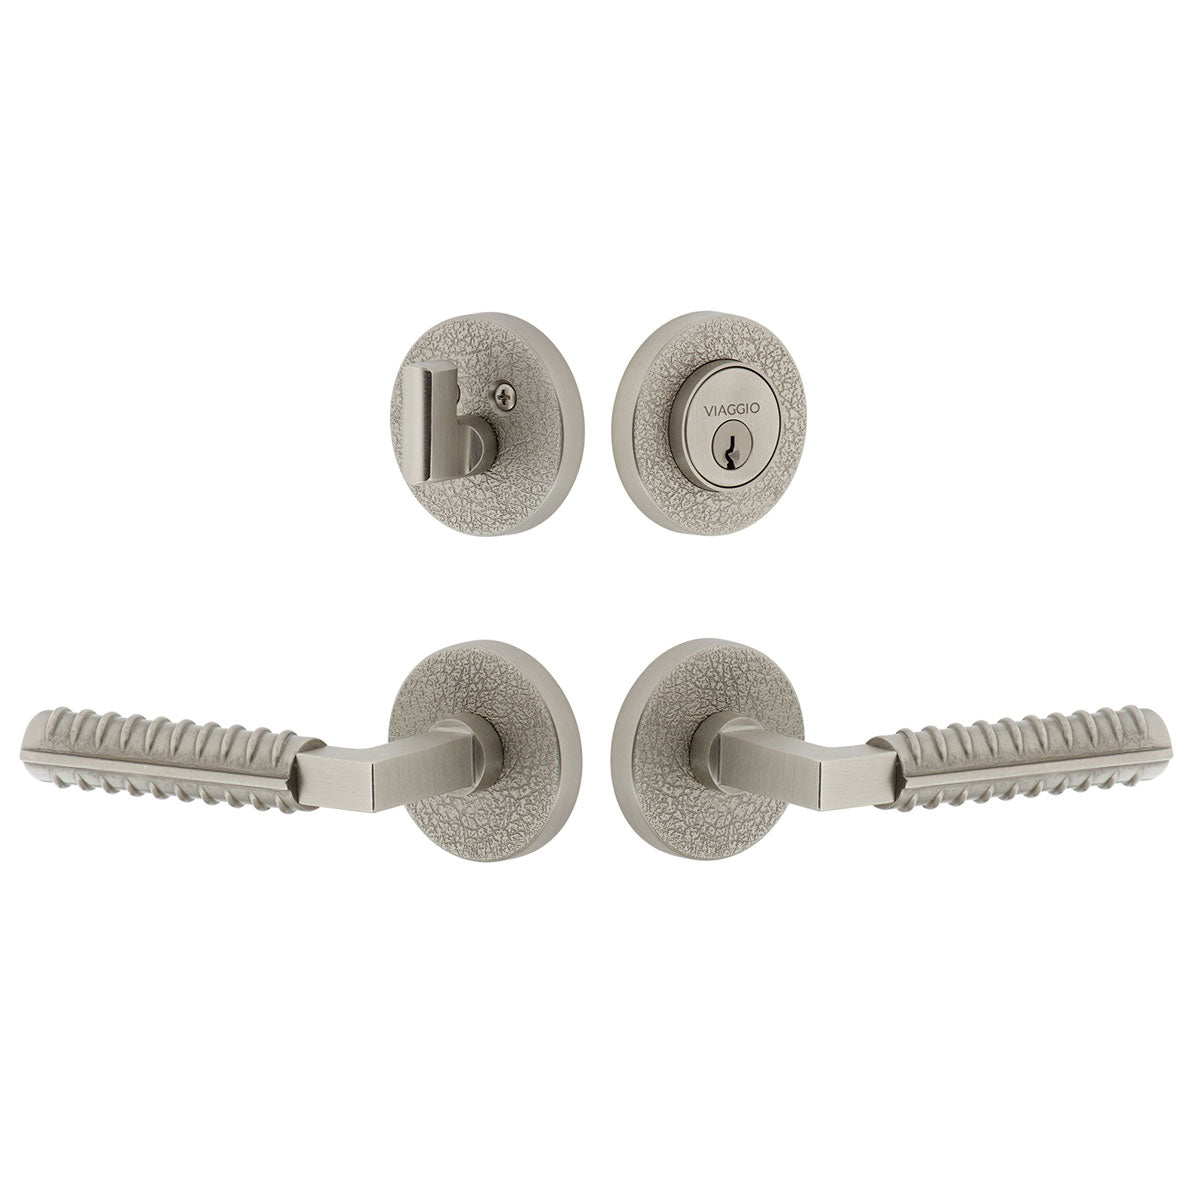 Circolo Leather Rosette Entry Set with Contempo Rebar Lever in Satin Nickel